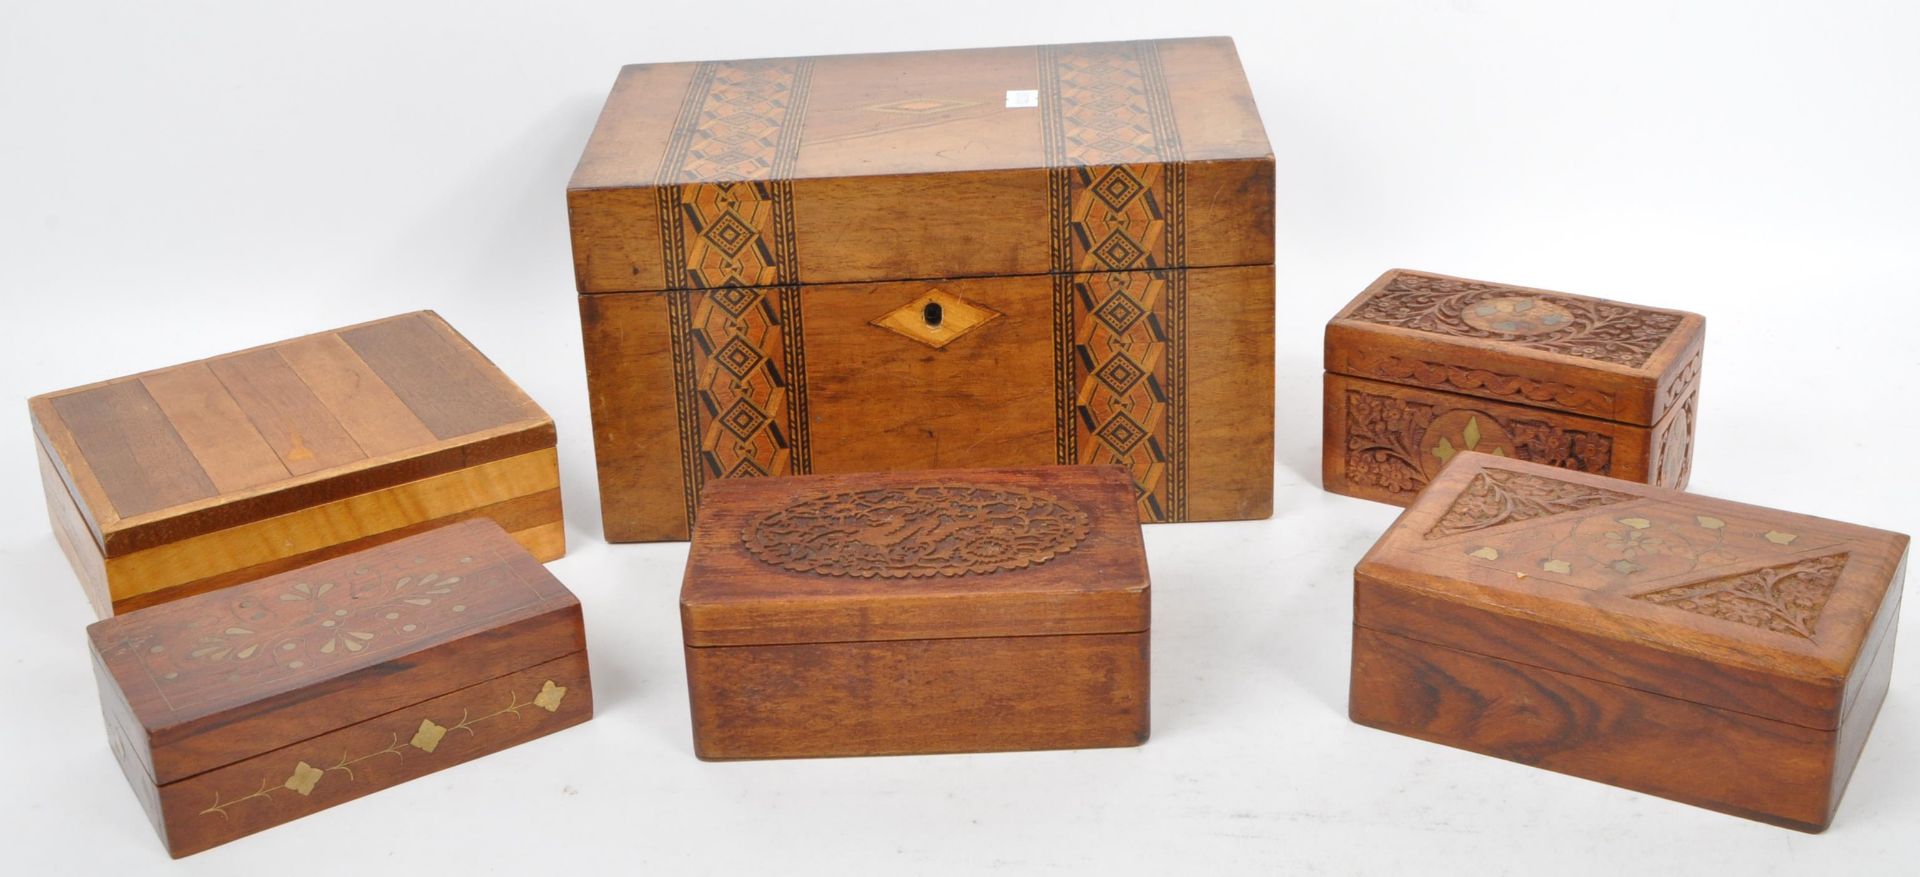 COLLECTION OF VINTAGE 20TH CENTURY CARVED & INLAID BOXES